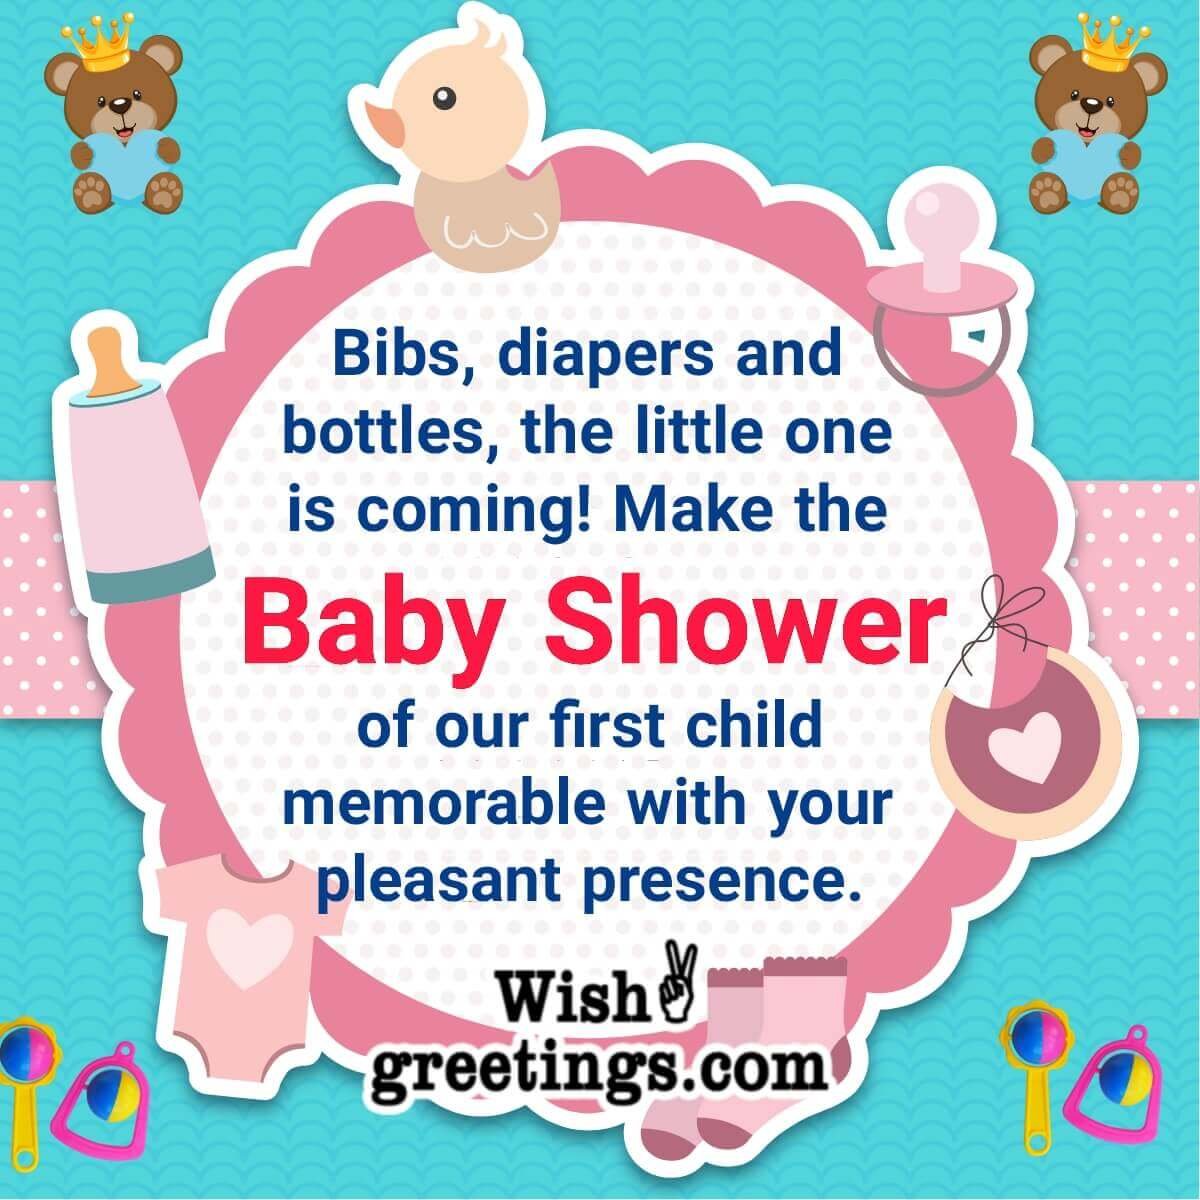 Baby Shower Invitation Messages